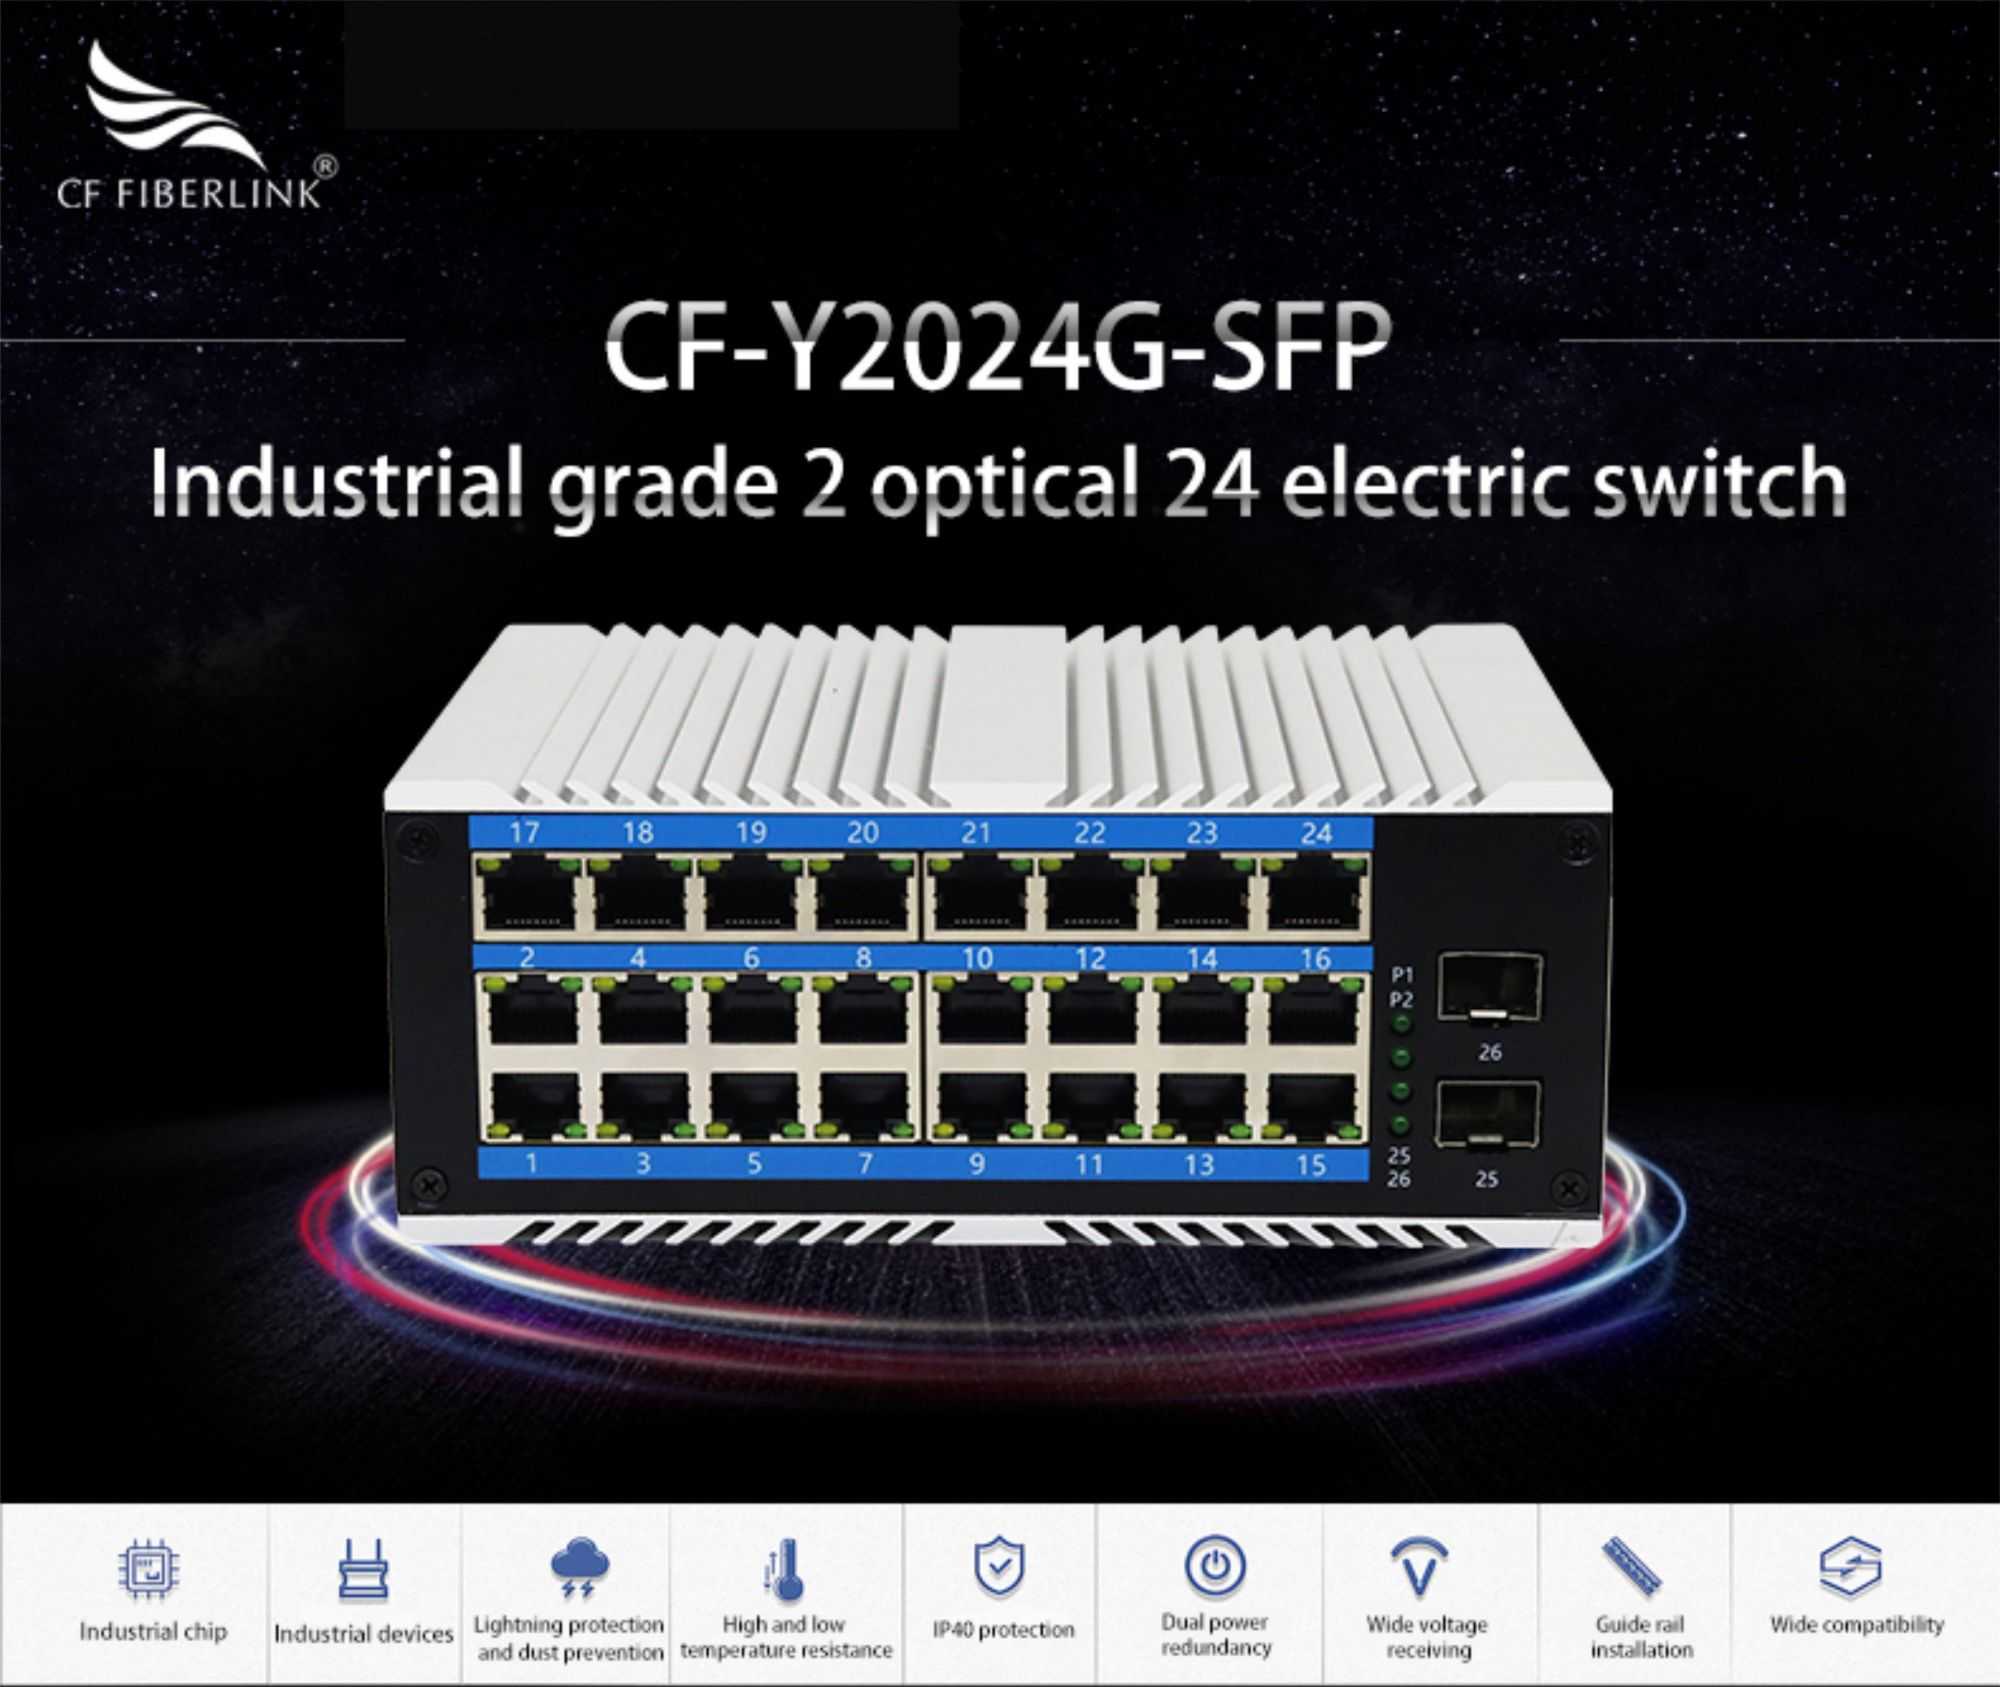 Create a new future of industrial Internet, CF FIBERLINK industrial switch new release!